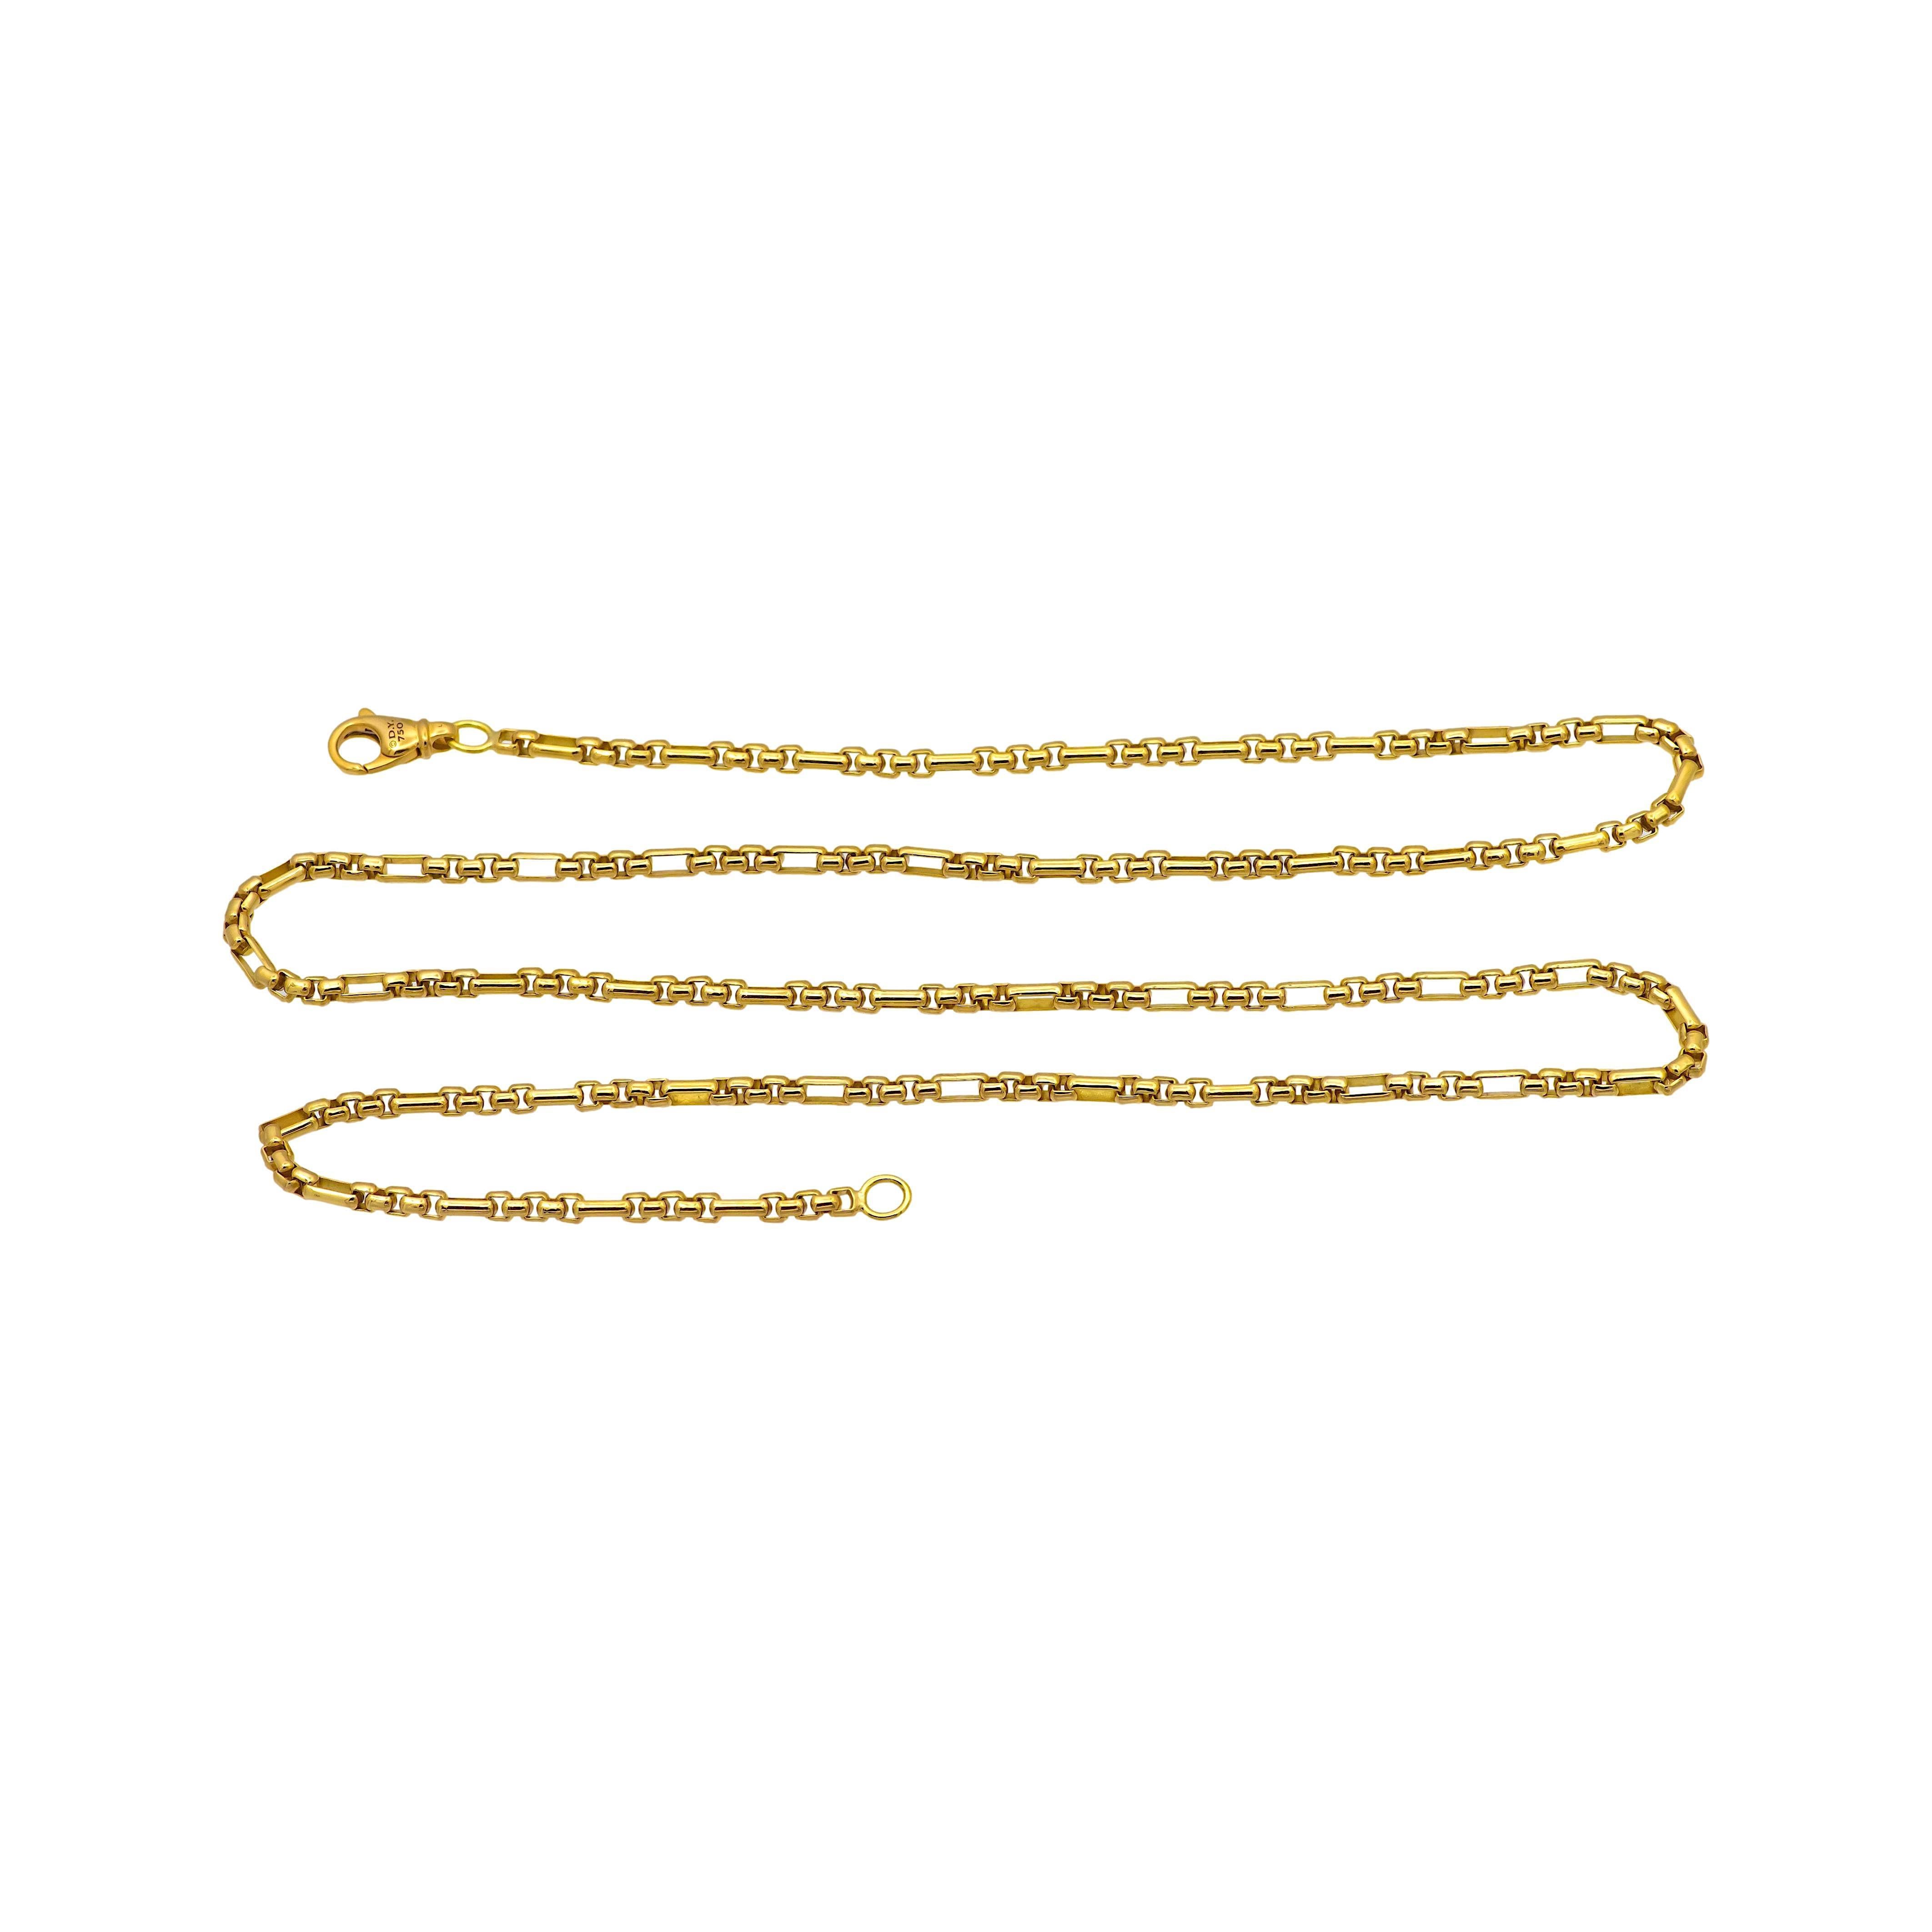 David Yurman open station box chain necklace from the Chain collection for Men finely crafted in 18 karat yellow gold featuring an open box link design measuring 3 mm wide and 26 inches long with a large lobster claw closure. Fully hallmarked with